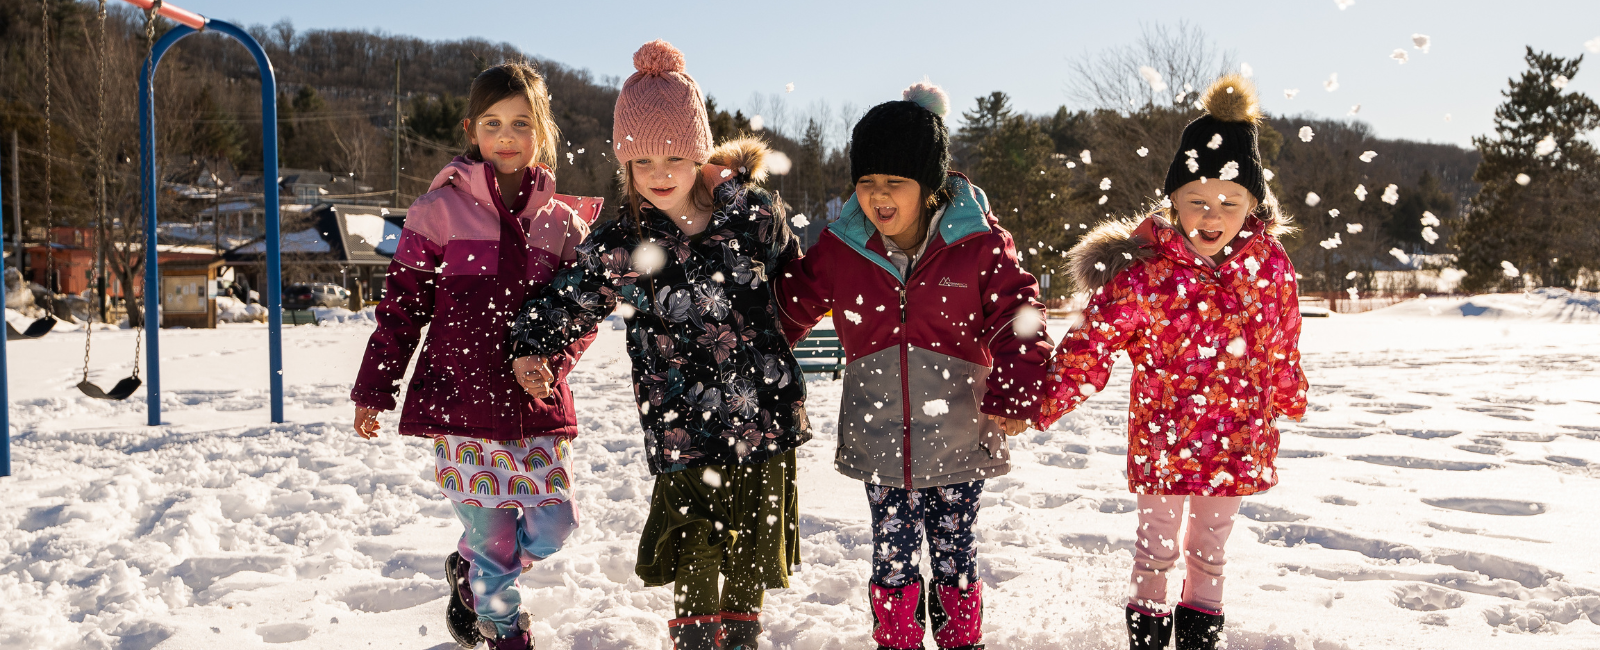 Four children playing in the snow with big smiles on their faces.